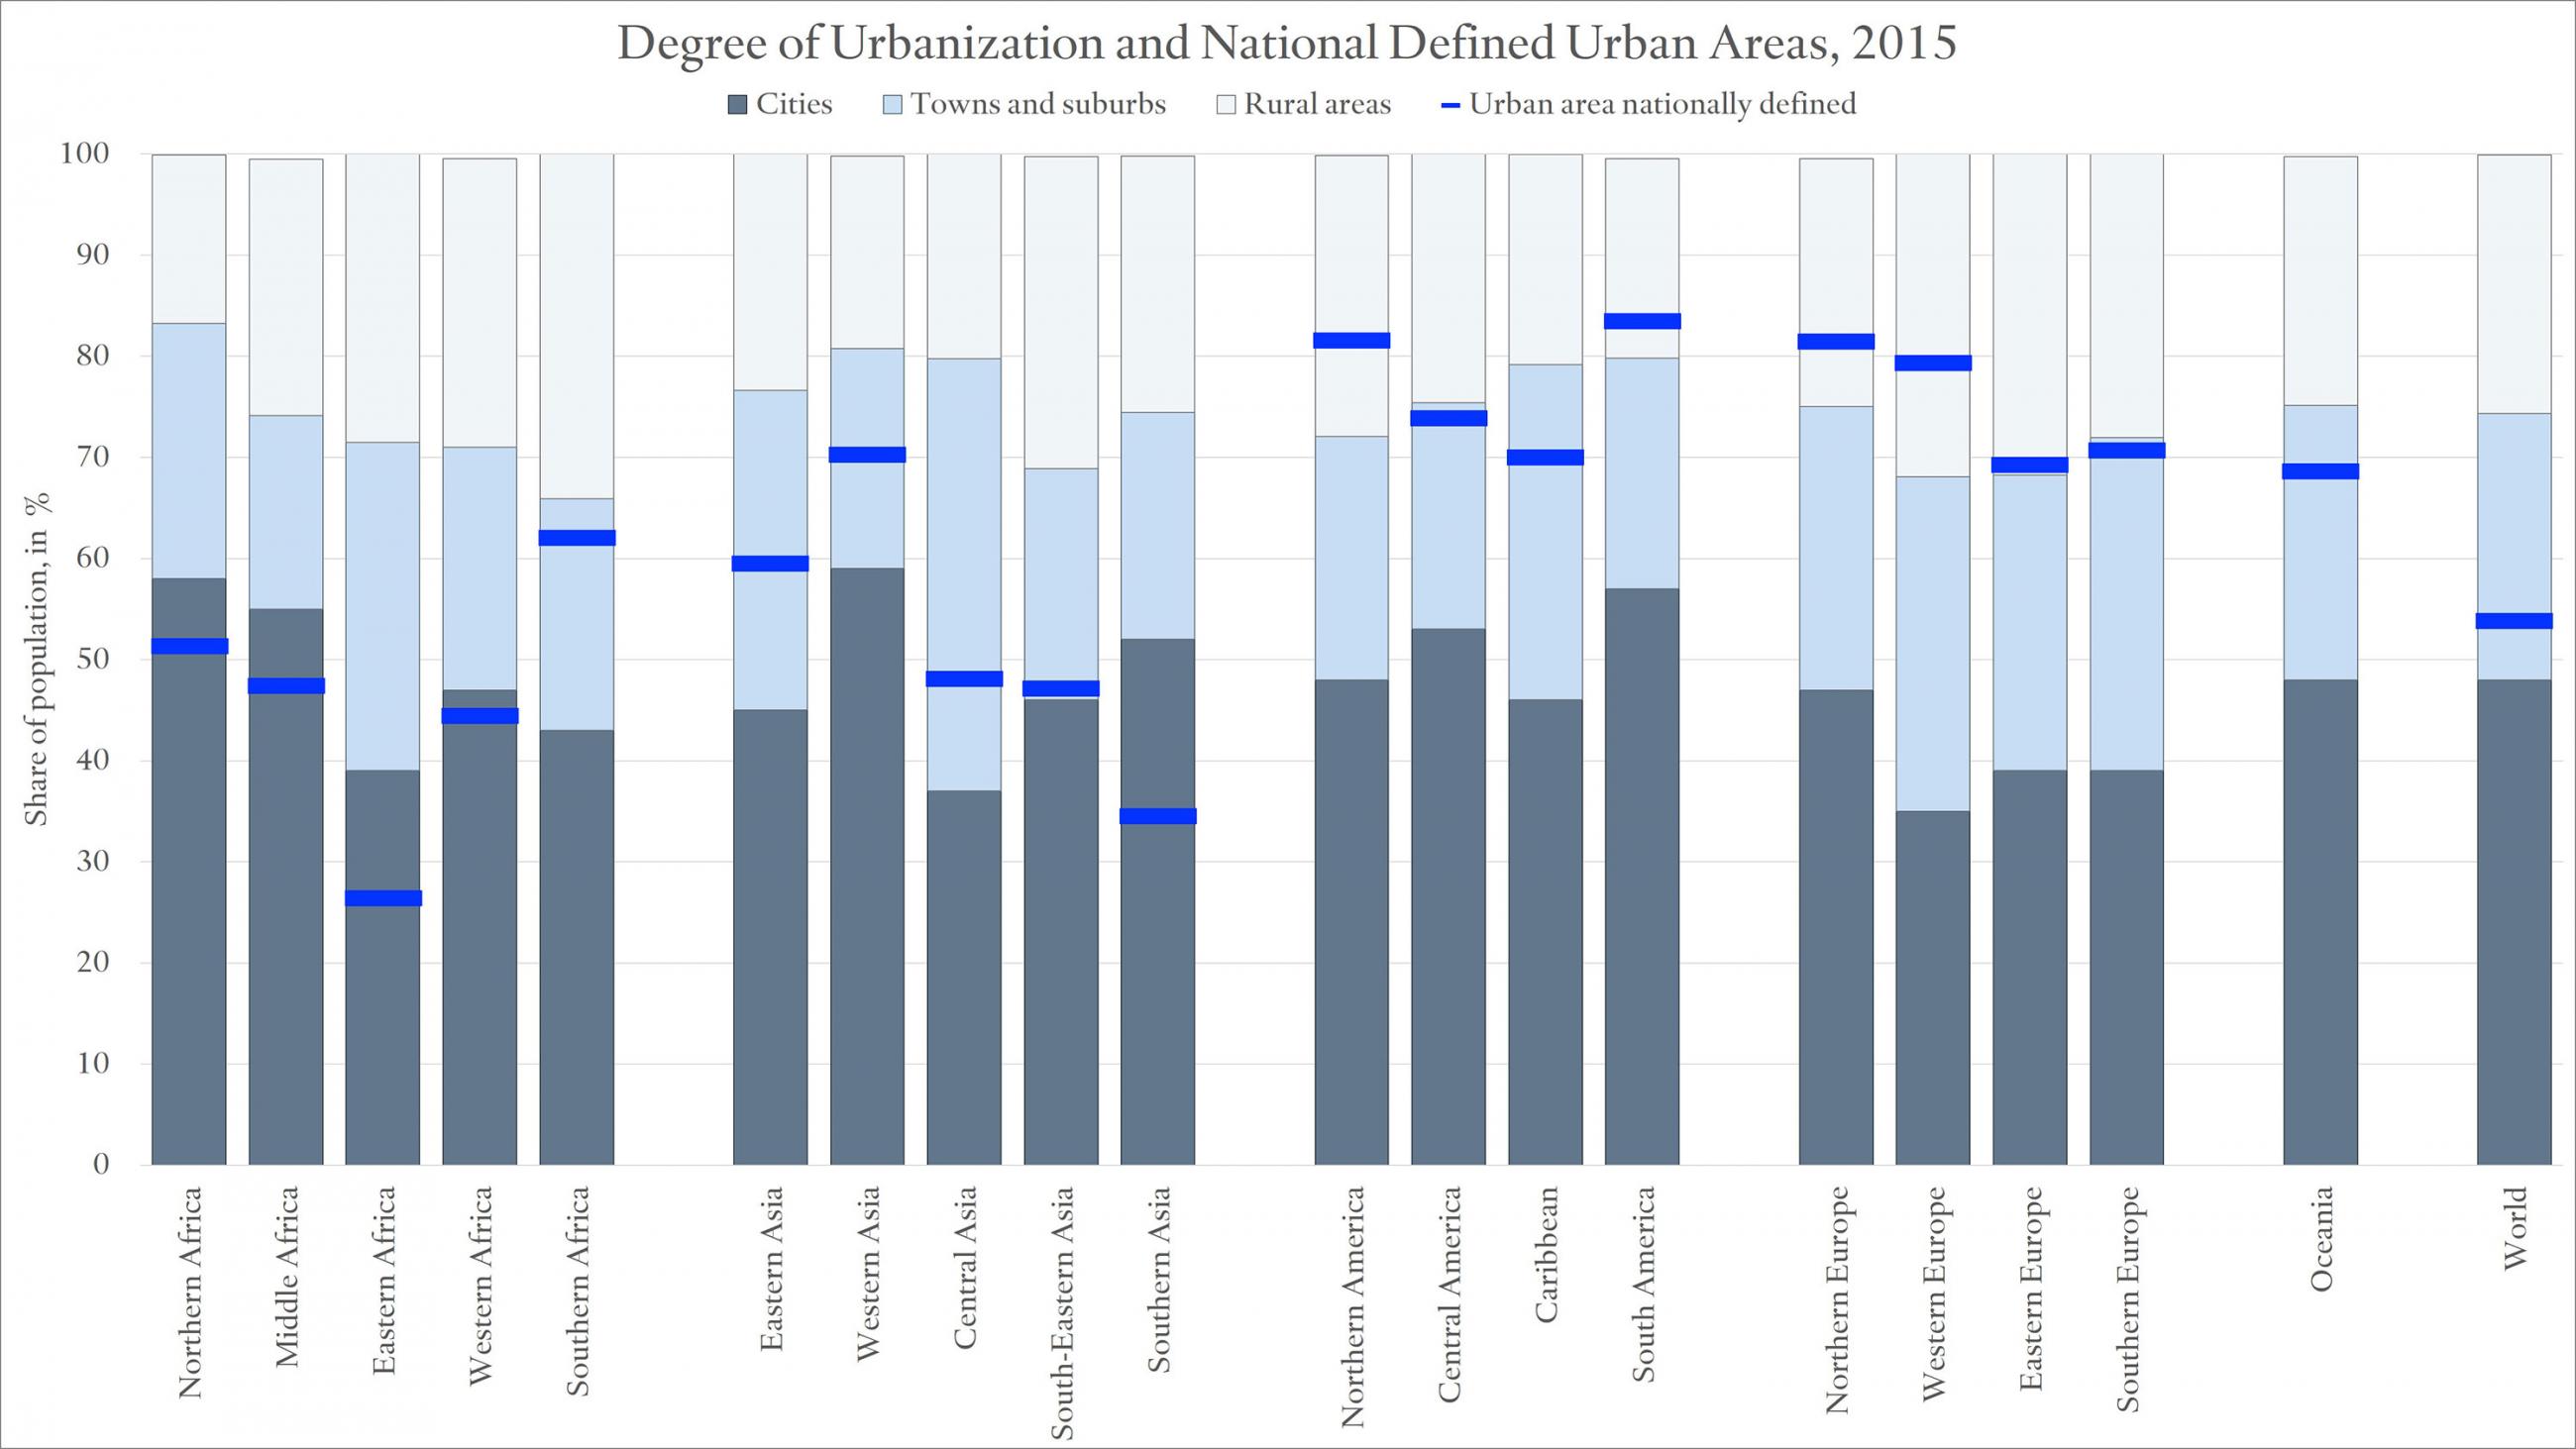 Image is a stacked bar graph with different parts of the world shown as stacked bars revealing the proportion of their populations that reside in cities, towns and suburbs, and rural areas as defined by the study. The graph also has blue dashes located on the bars that indicate nationally defined urban areas. In some cases there is a huge discrepancy between the two.